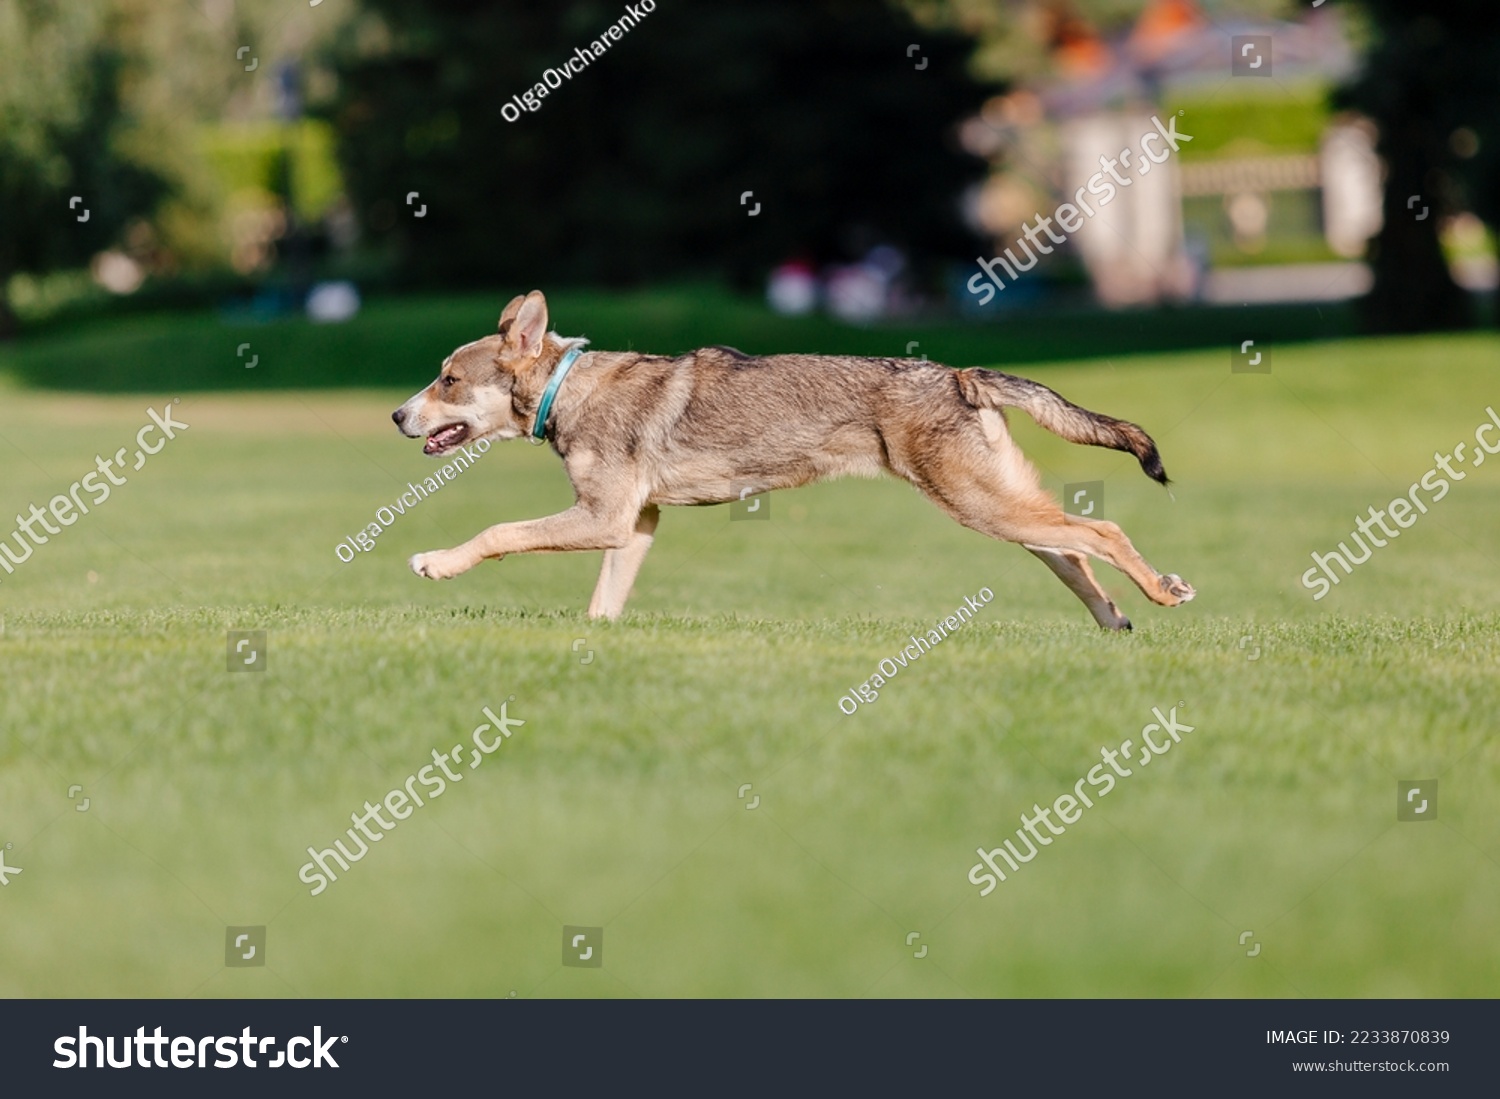 A mixed breed dog on a walk. Dog running on the grass. Cute dog playing. Funny pet. Pet adoption. #2233870839